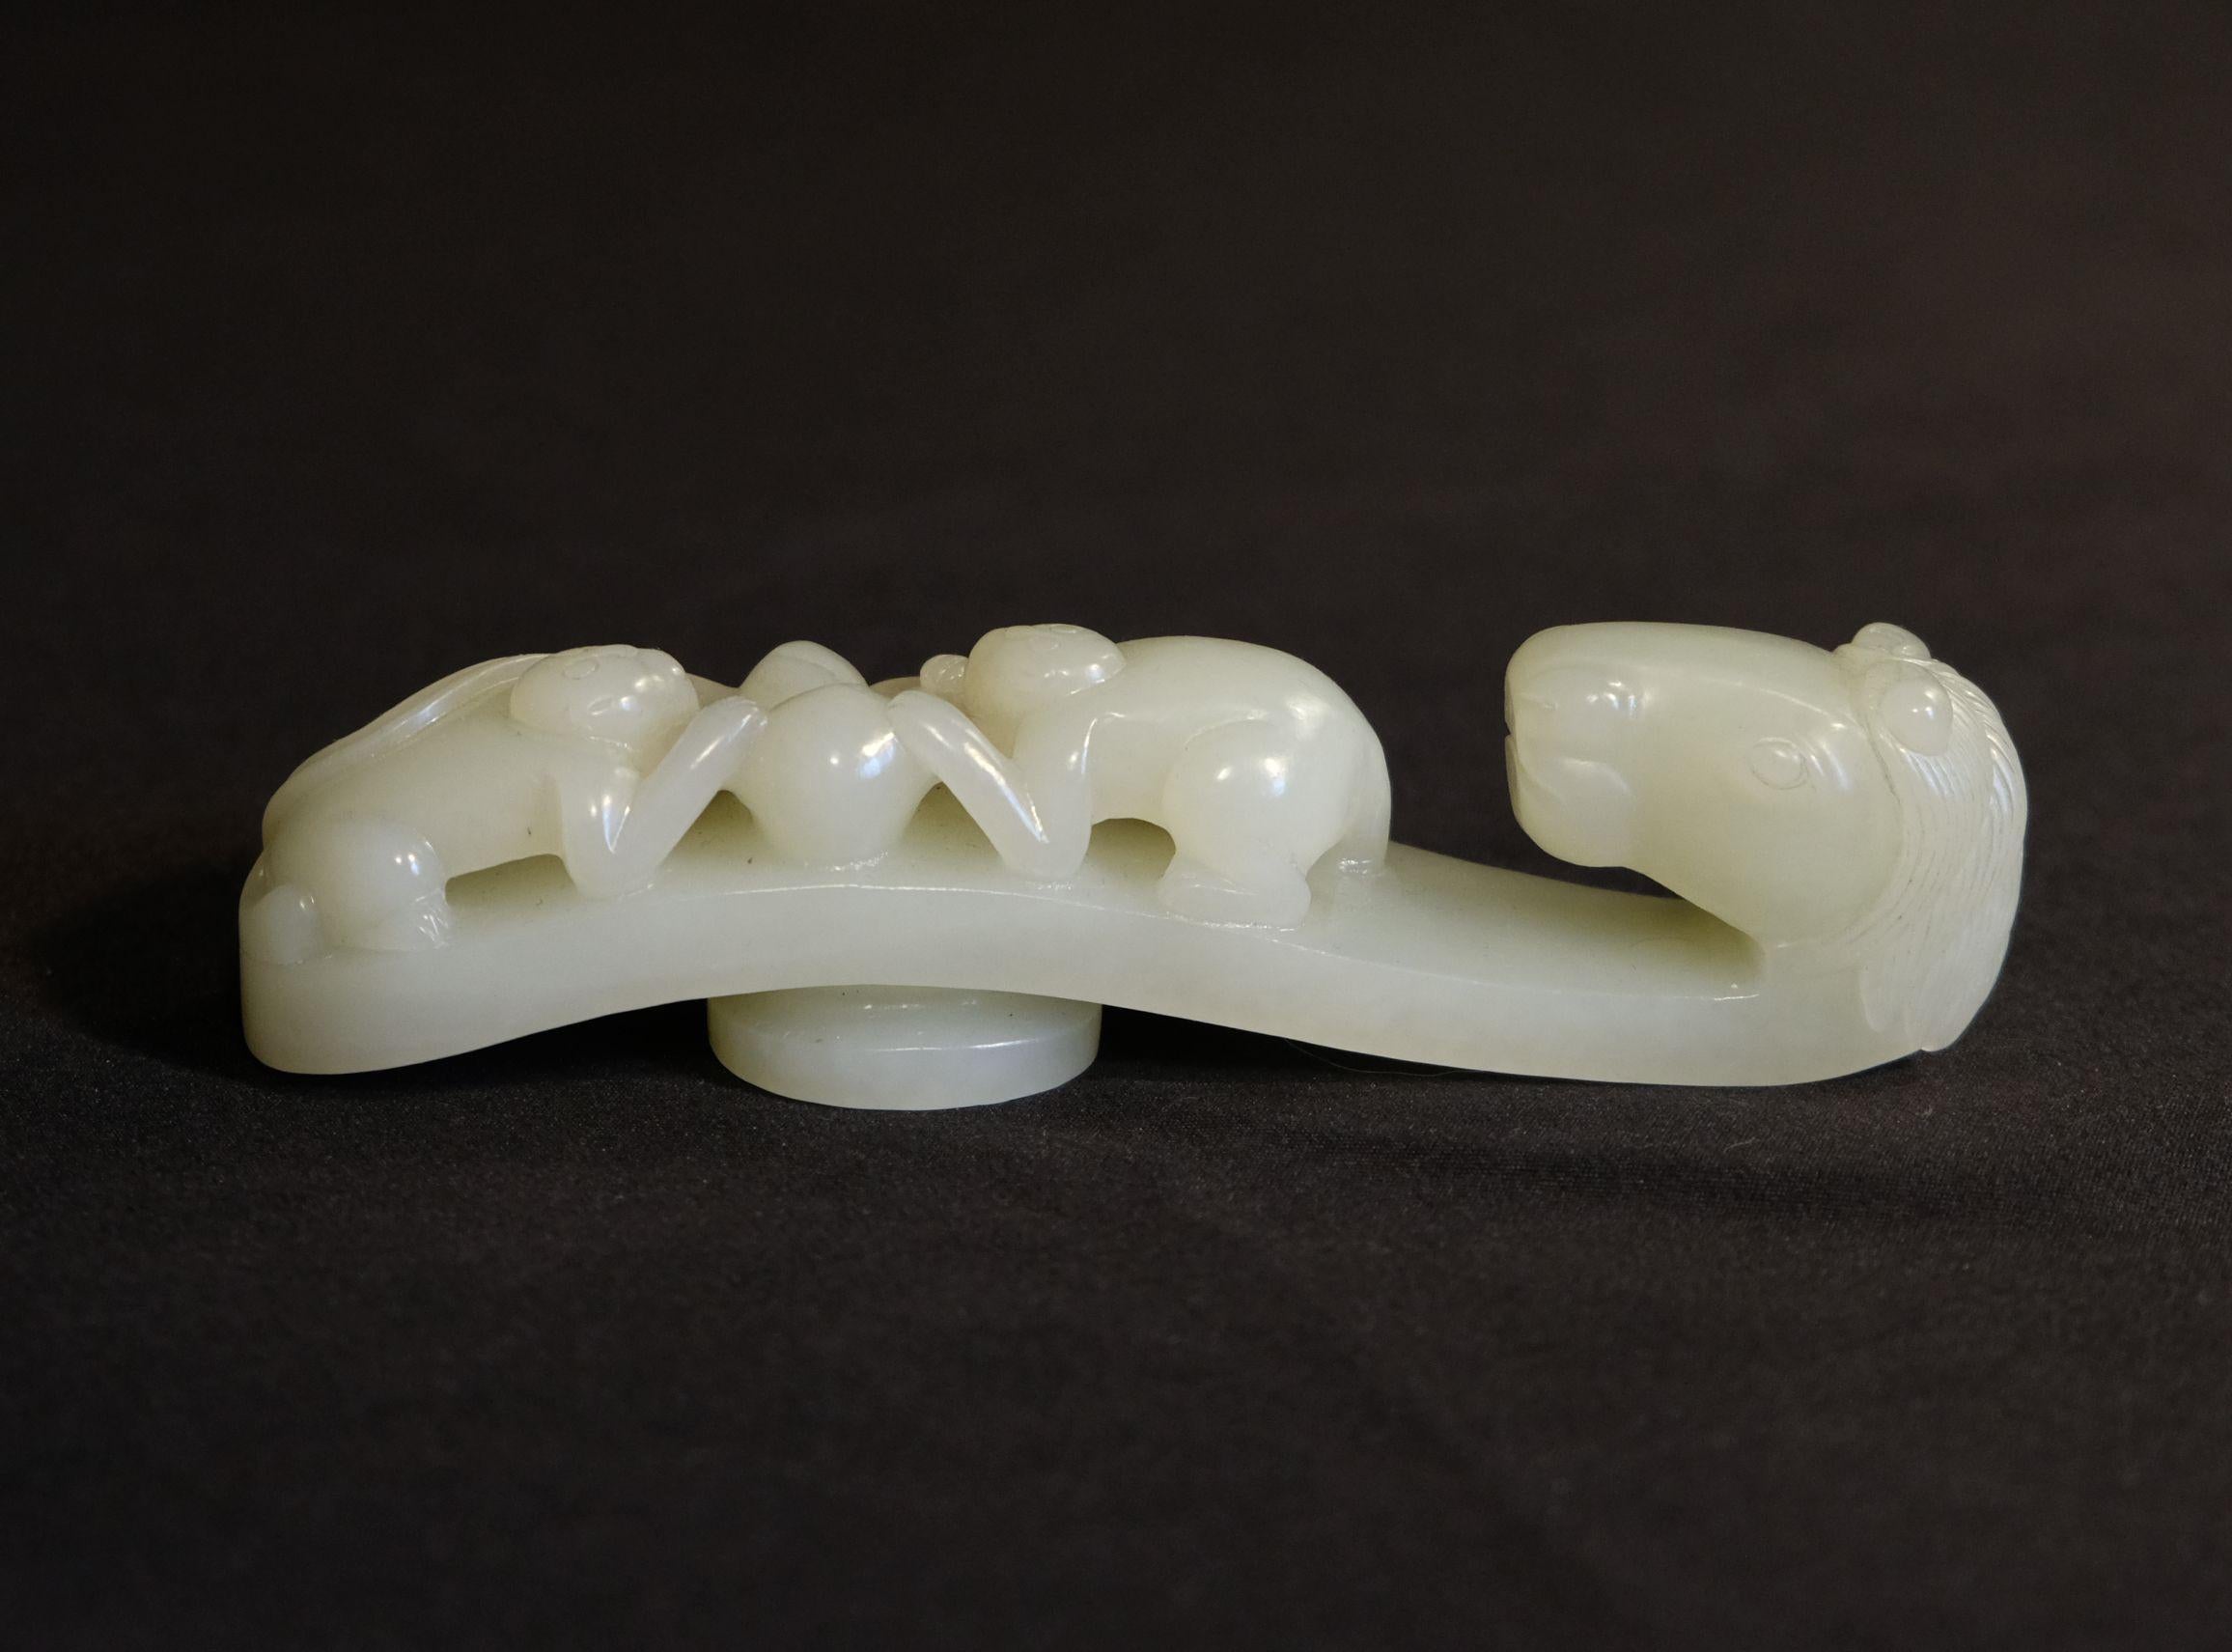 A large Chinese carved Hetian White Celedon jade buckle, a beast head with two monkeys on the lower part and two peaches in the middle, depicting the meaning of long life with a successful political career.

Dimensions:

Height: 4.75